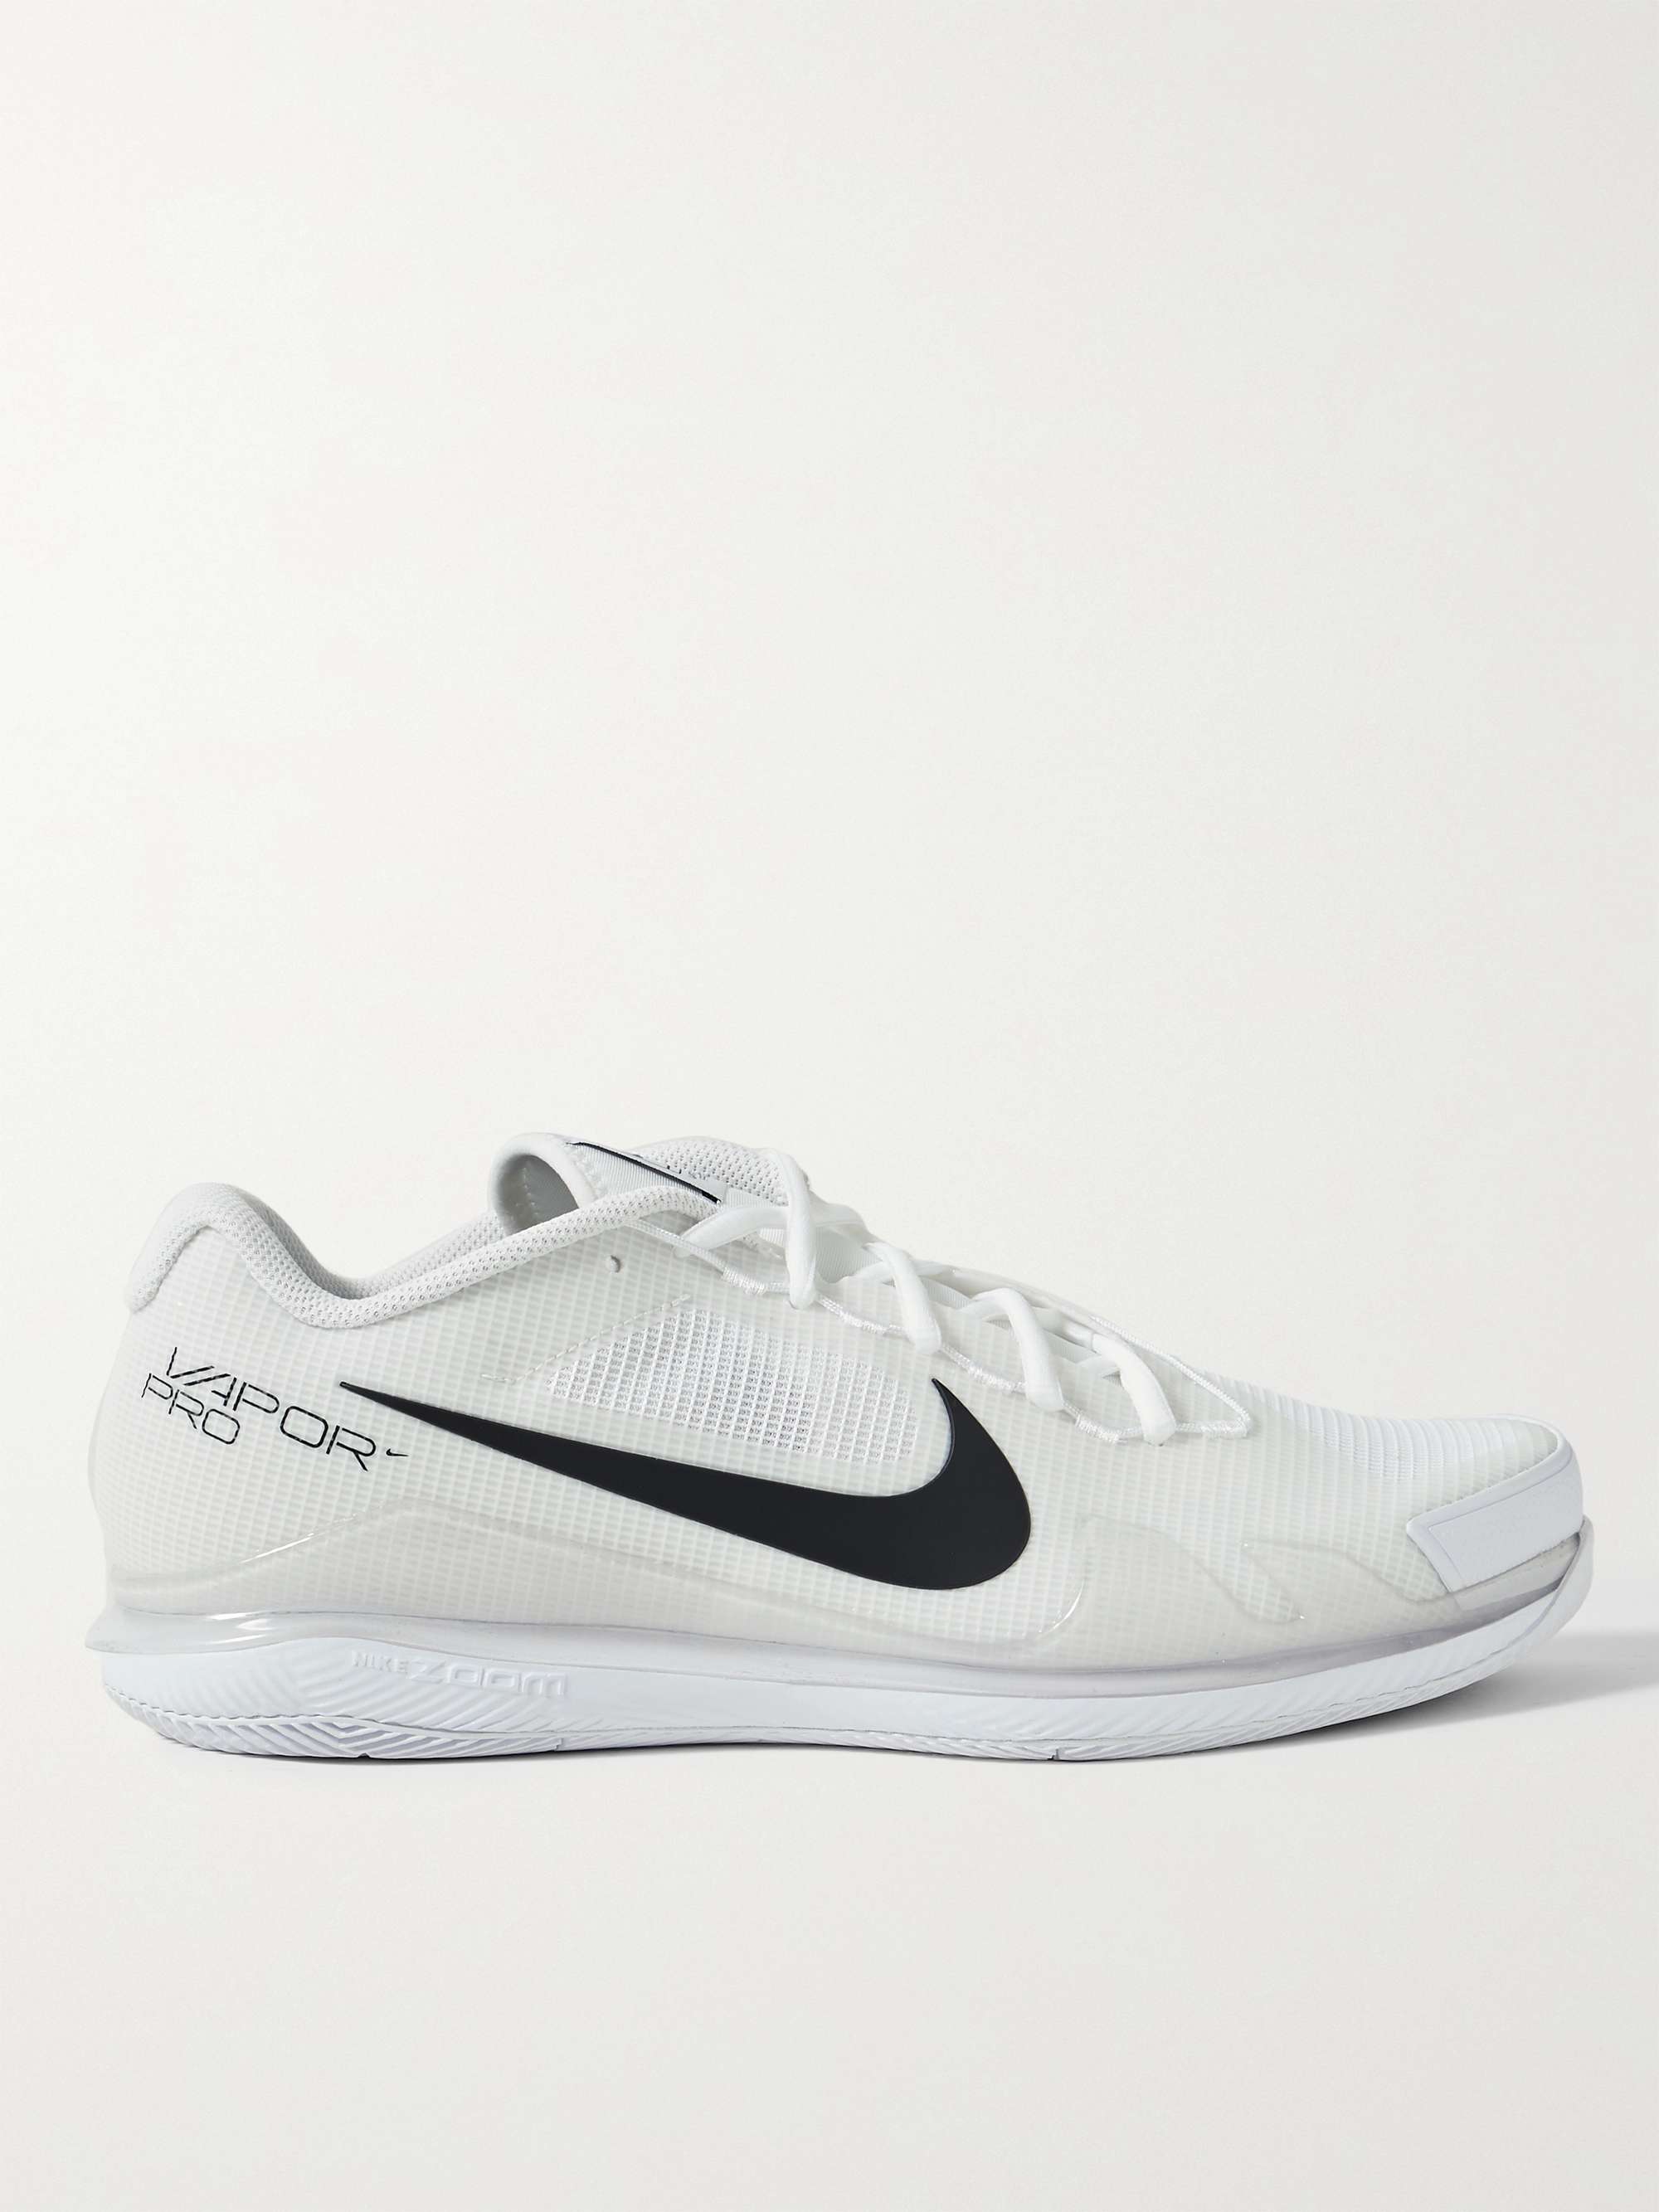 Pretty Ninth home delivery White NikeCourt Air Zoom Vapor Pro Rubber-Trimmed Mesh Tennis Sneakers |  NIKE TENNIS | MR PORTER